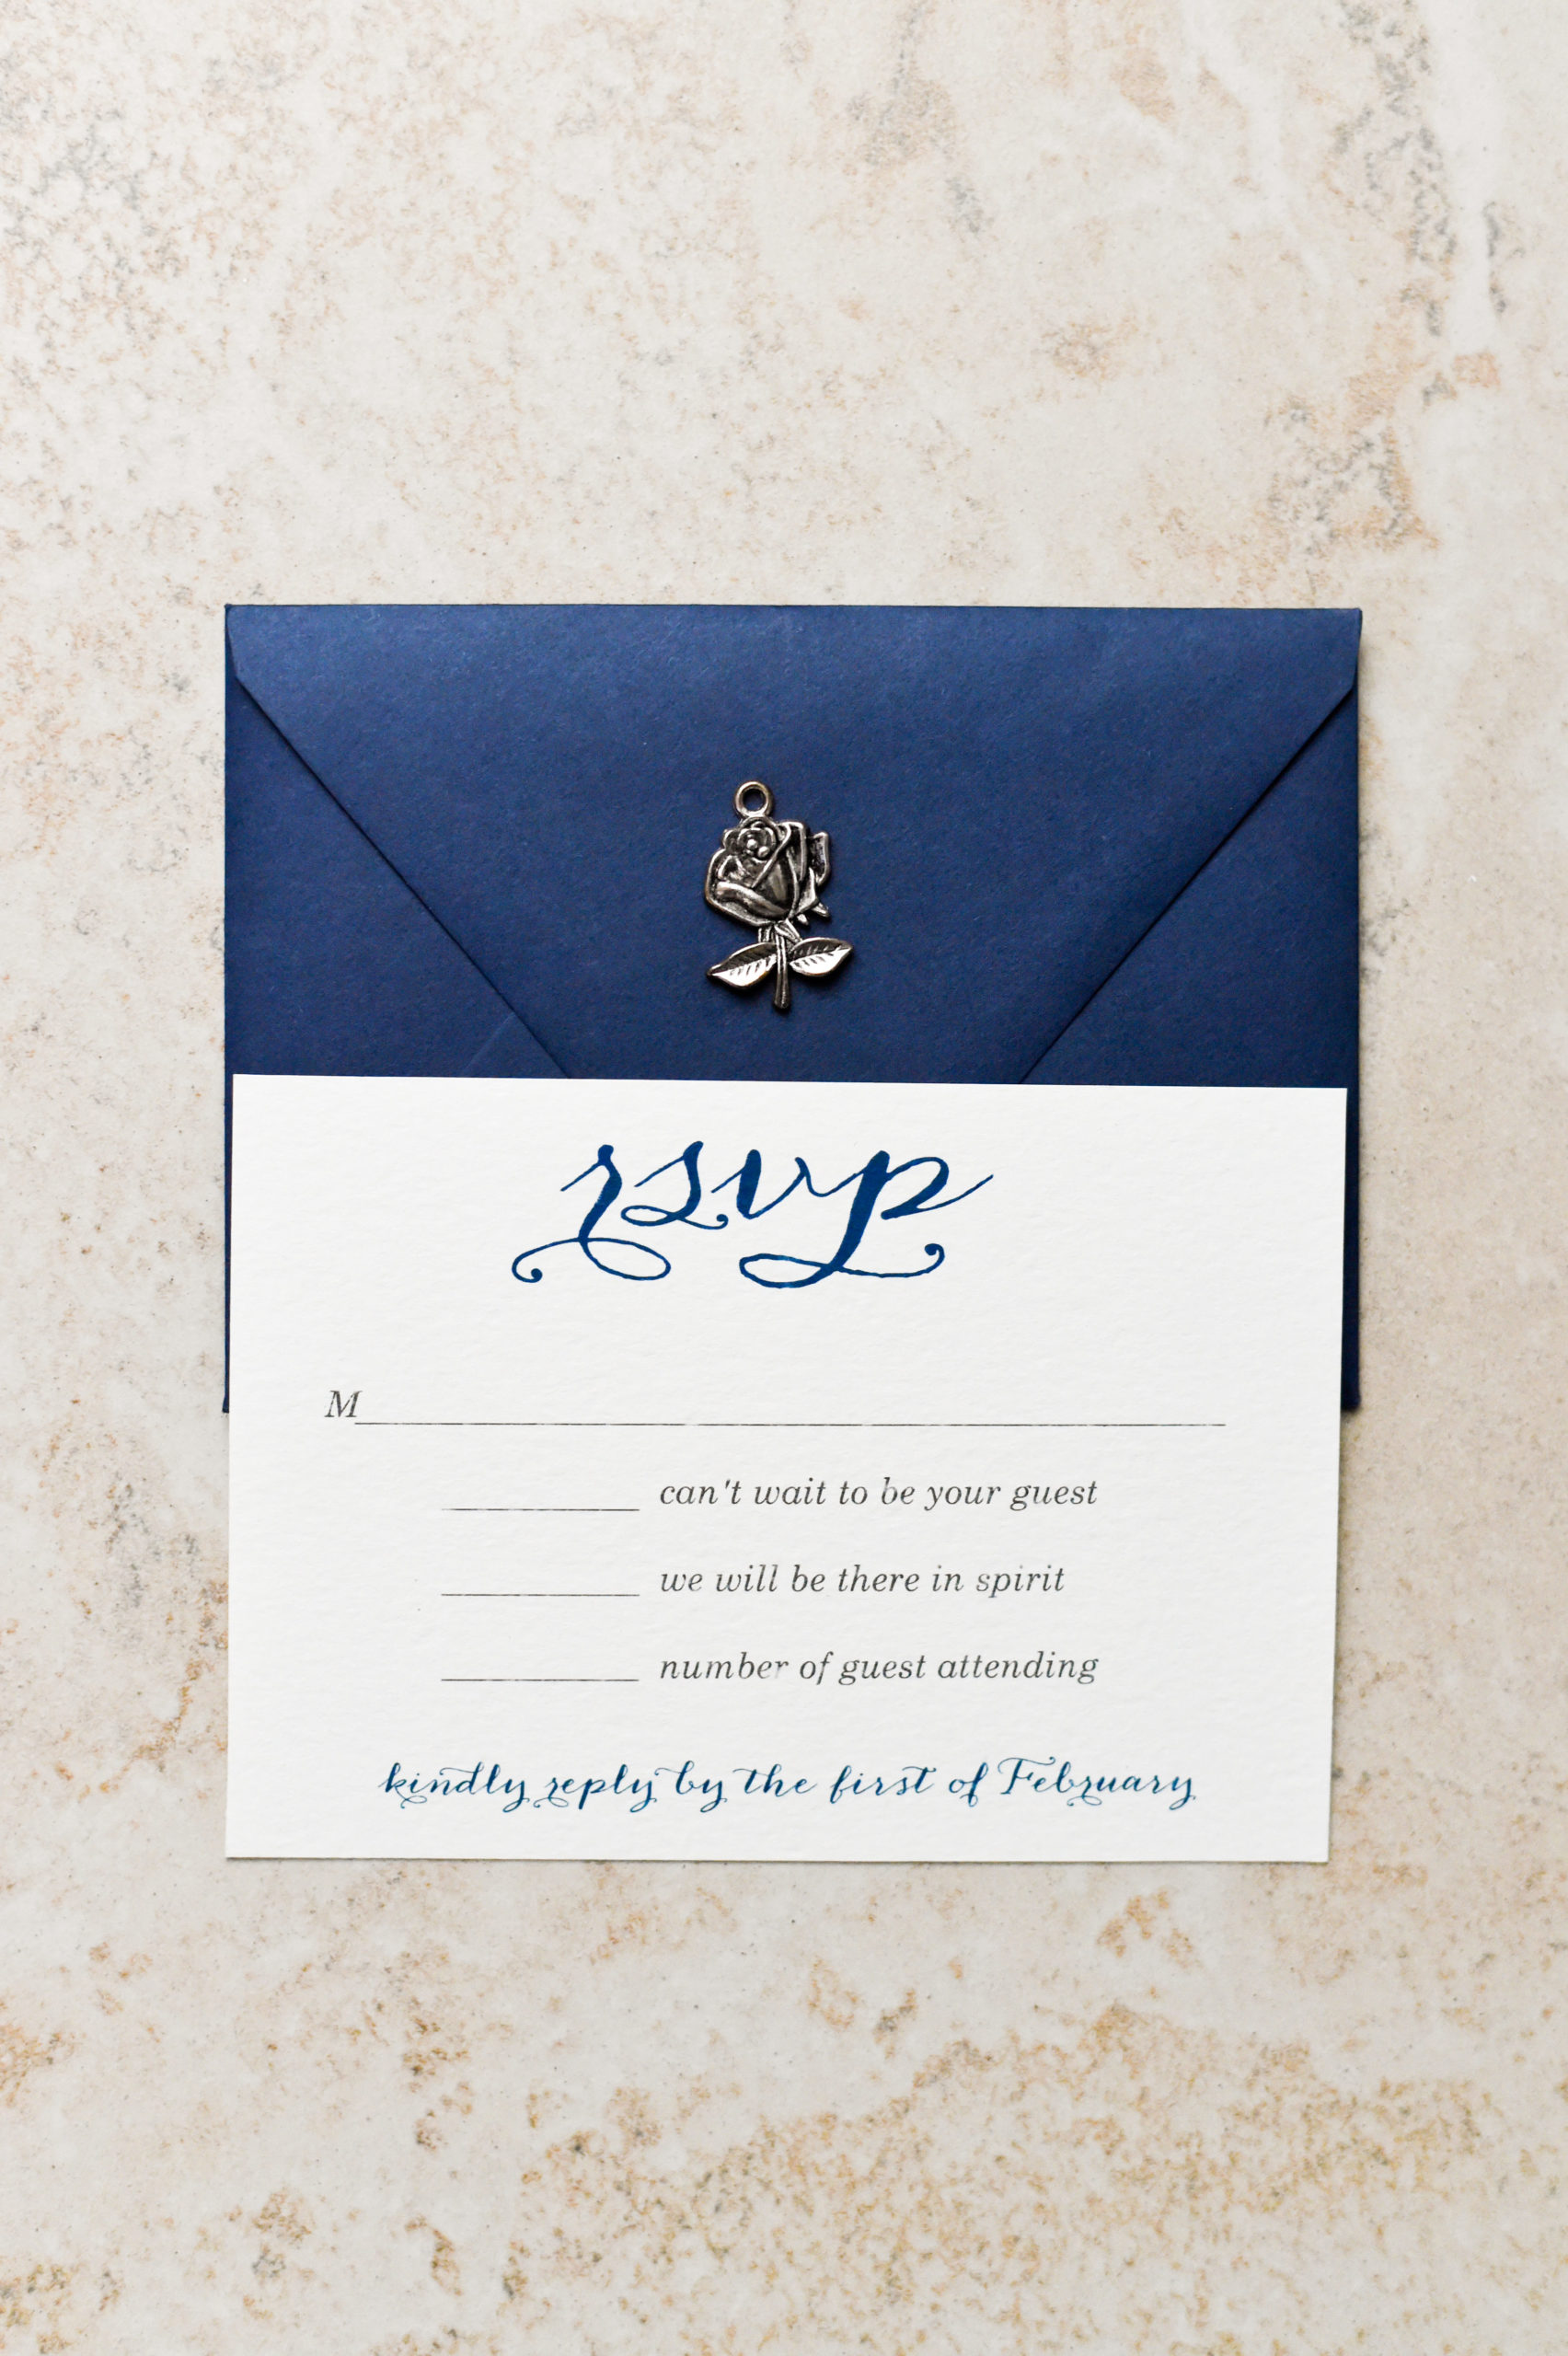 The perfect navy and script Beauty and the Beast wedding invitation